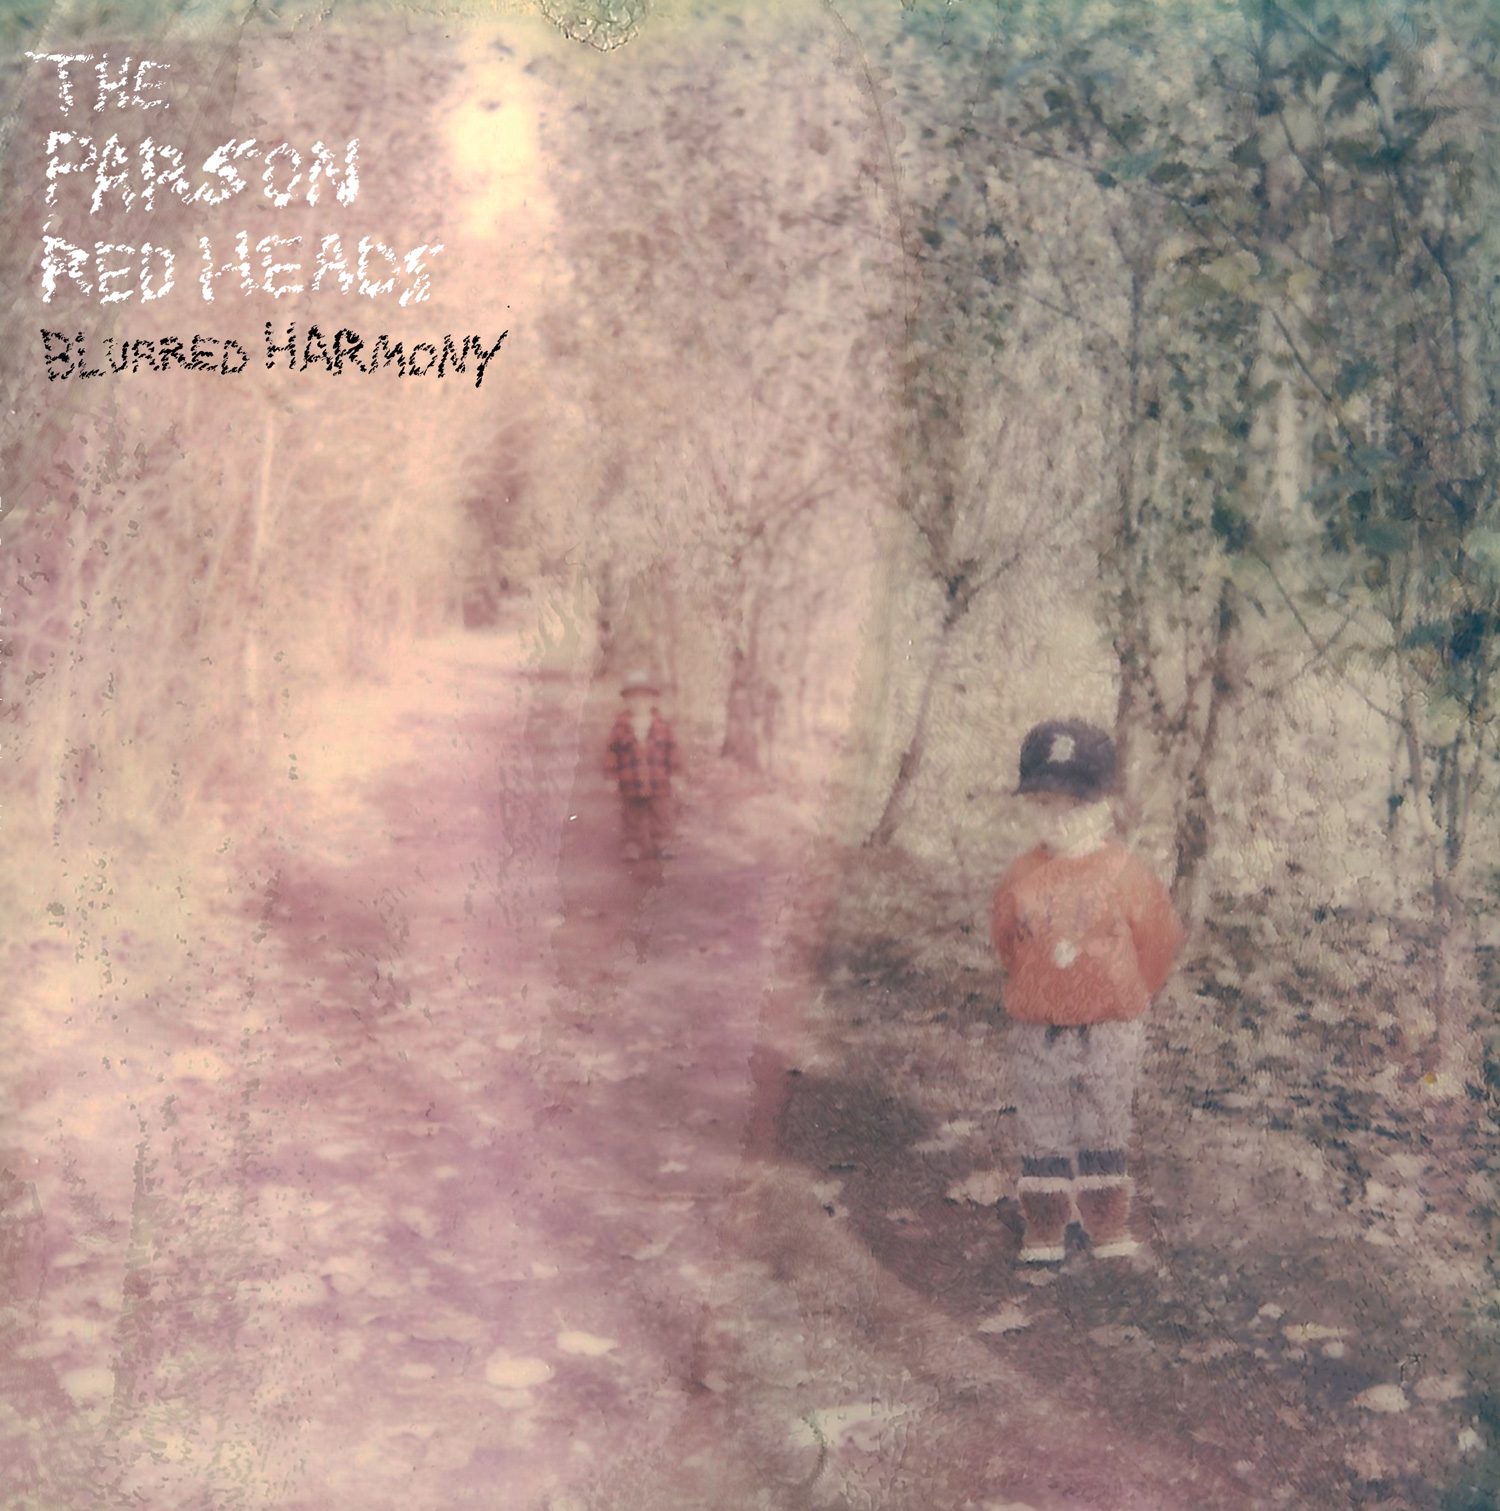 “Blurred Harmony” from The Parson Red Heads receives 8.9 from Paste Magazine